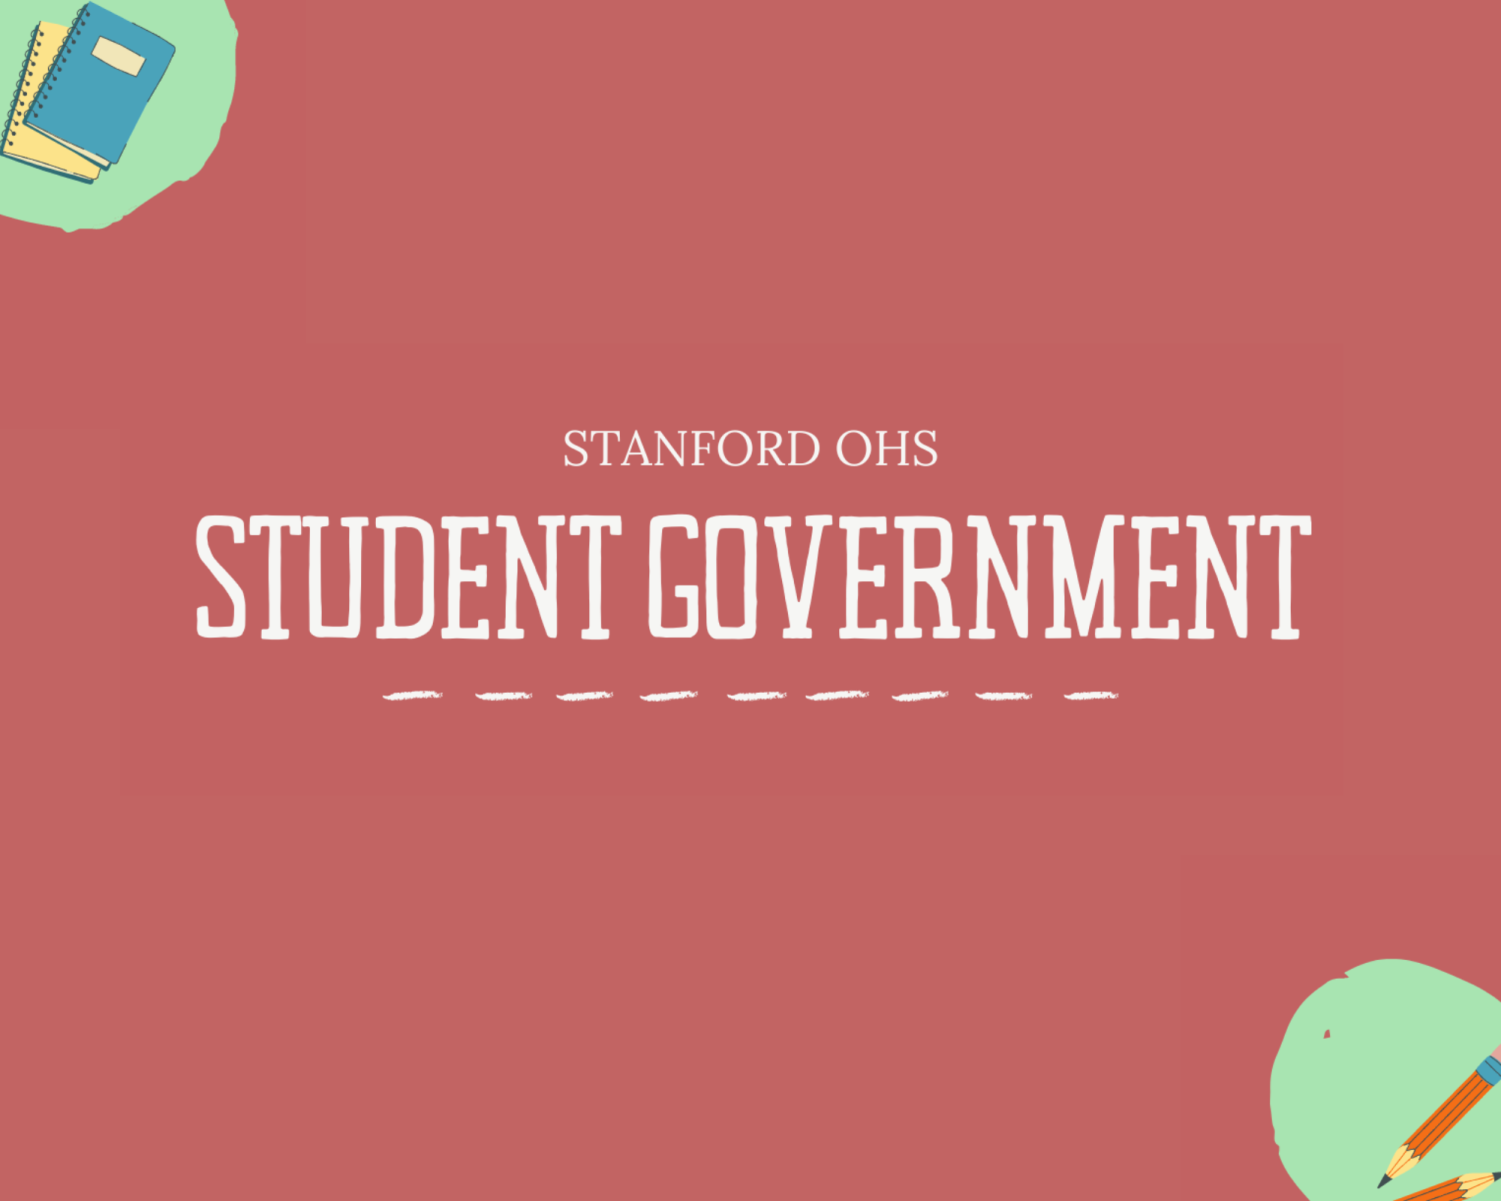 Image vs. Policy: Student Government Speech Impressions – OHS Observer